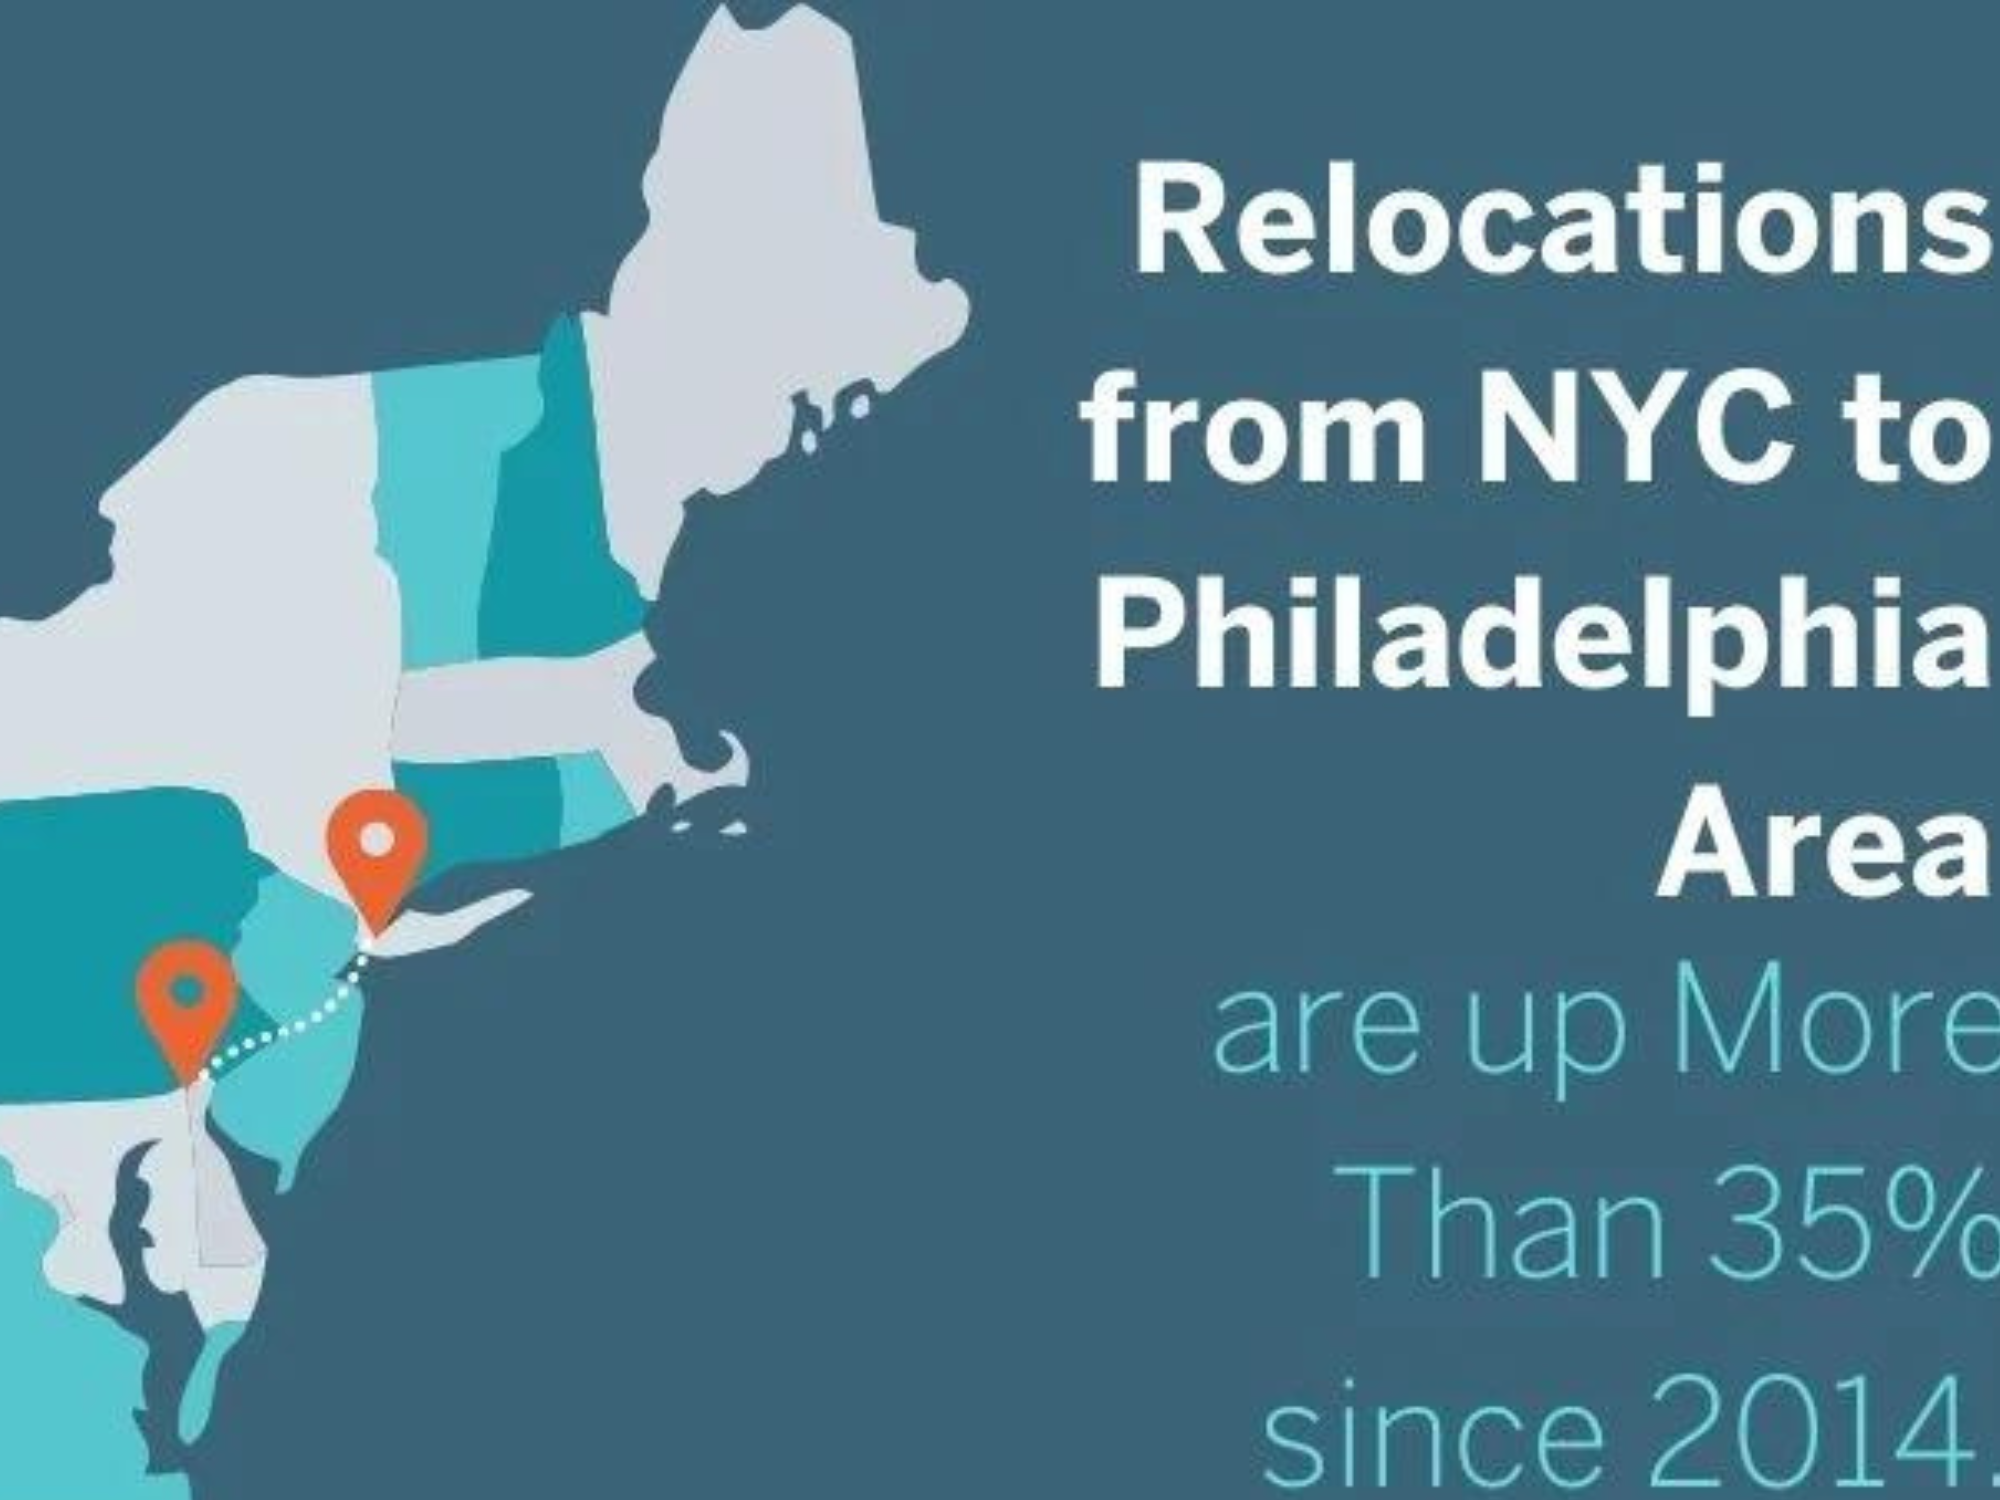 WHY ARE PEOPLE RELOCATING FROM NYC TO PHILLY?